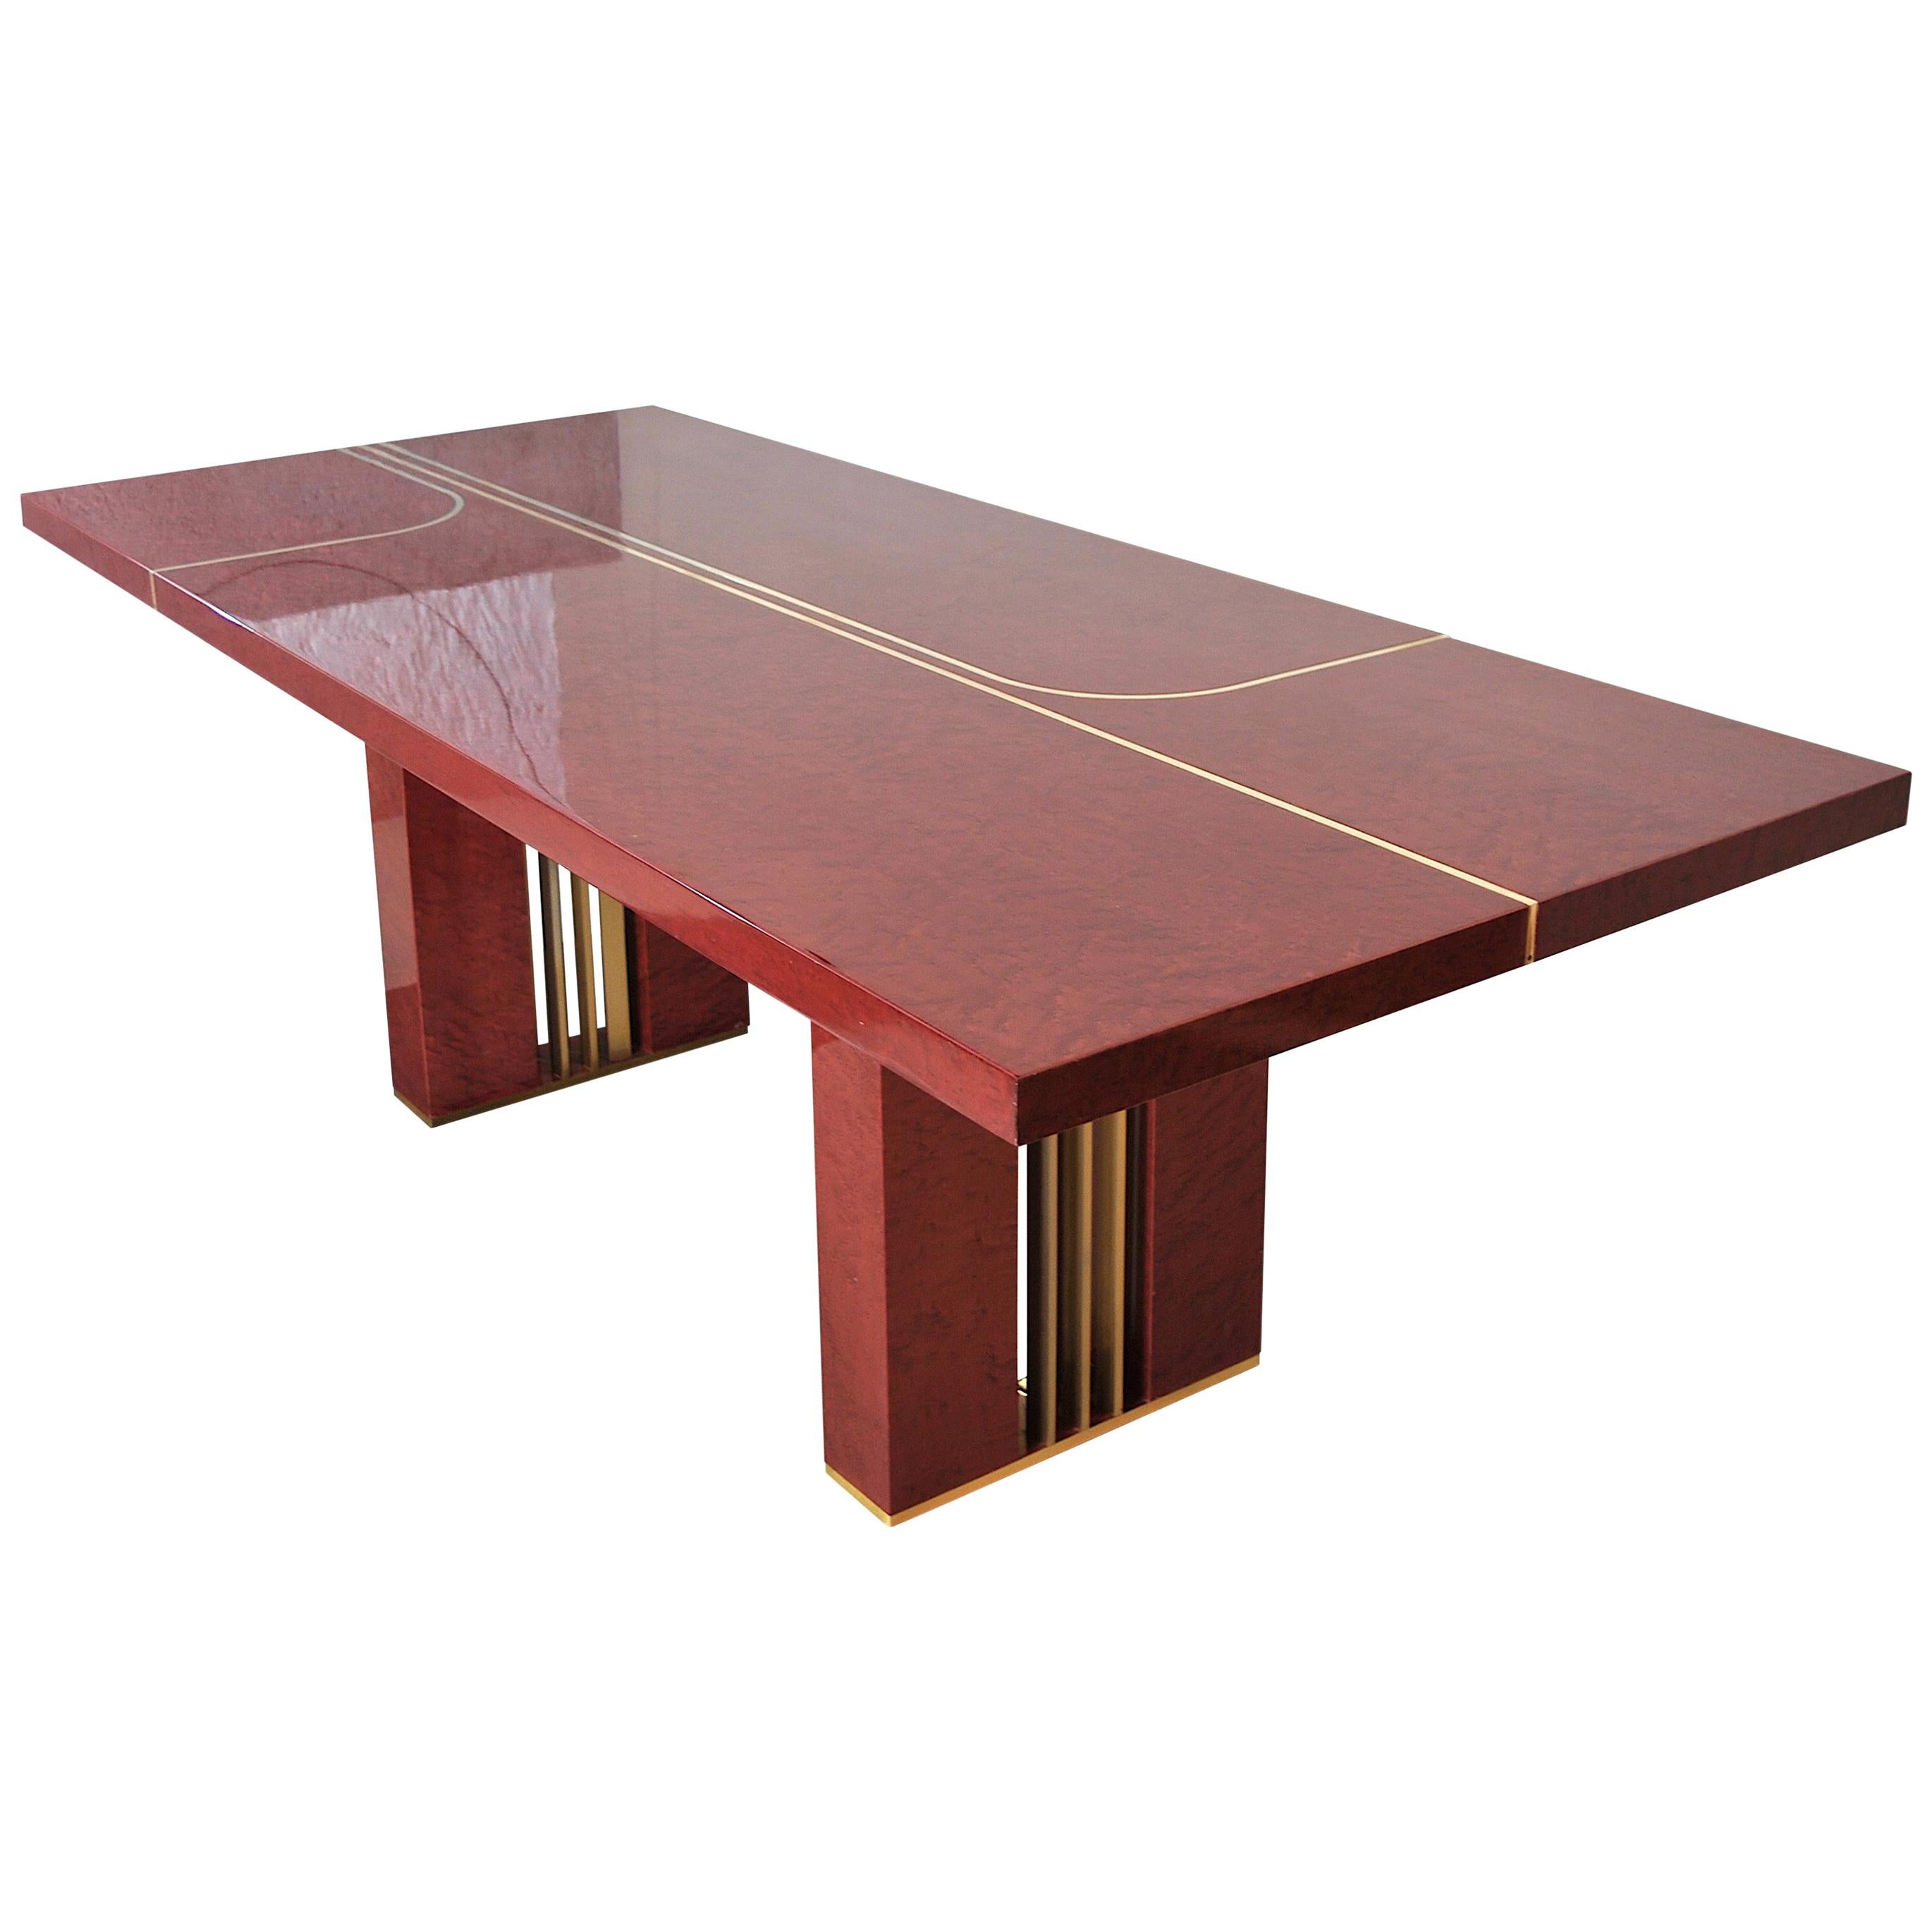 Romeo Rega Italian Midcentury Red Lacquered Wood and Brass French Table, 1980s